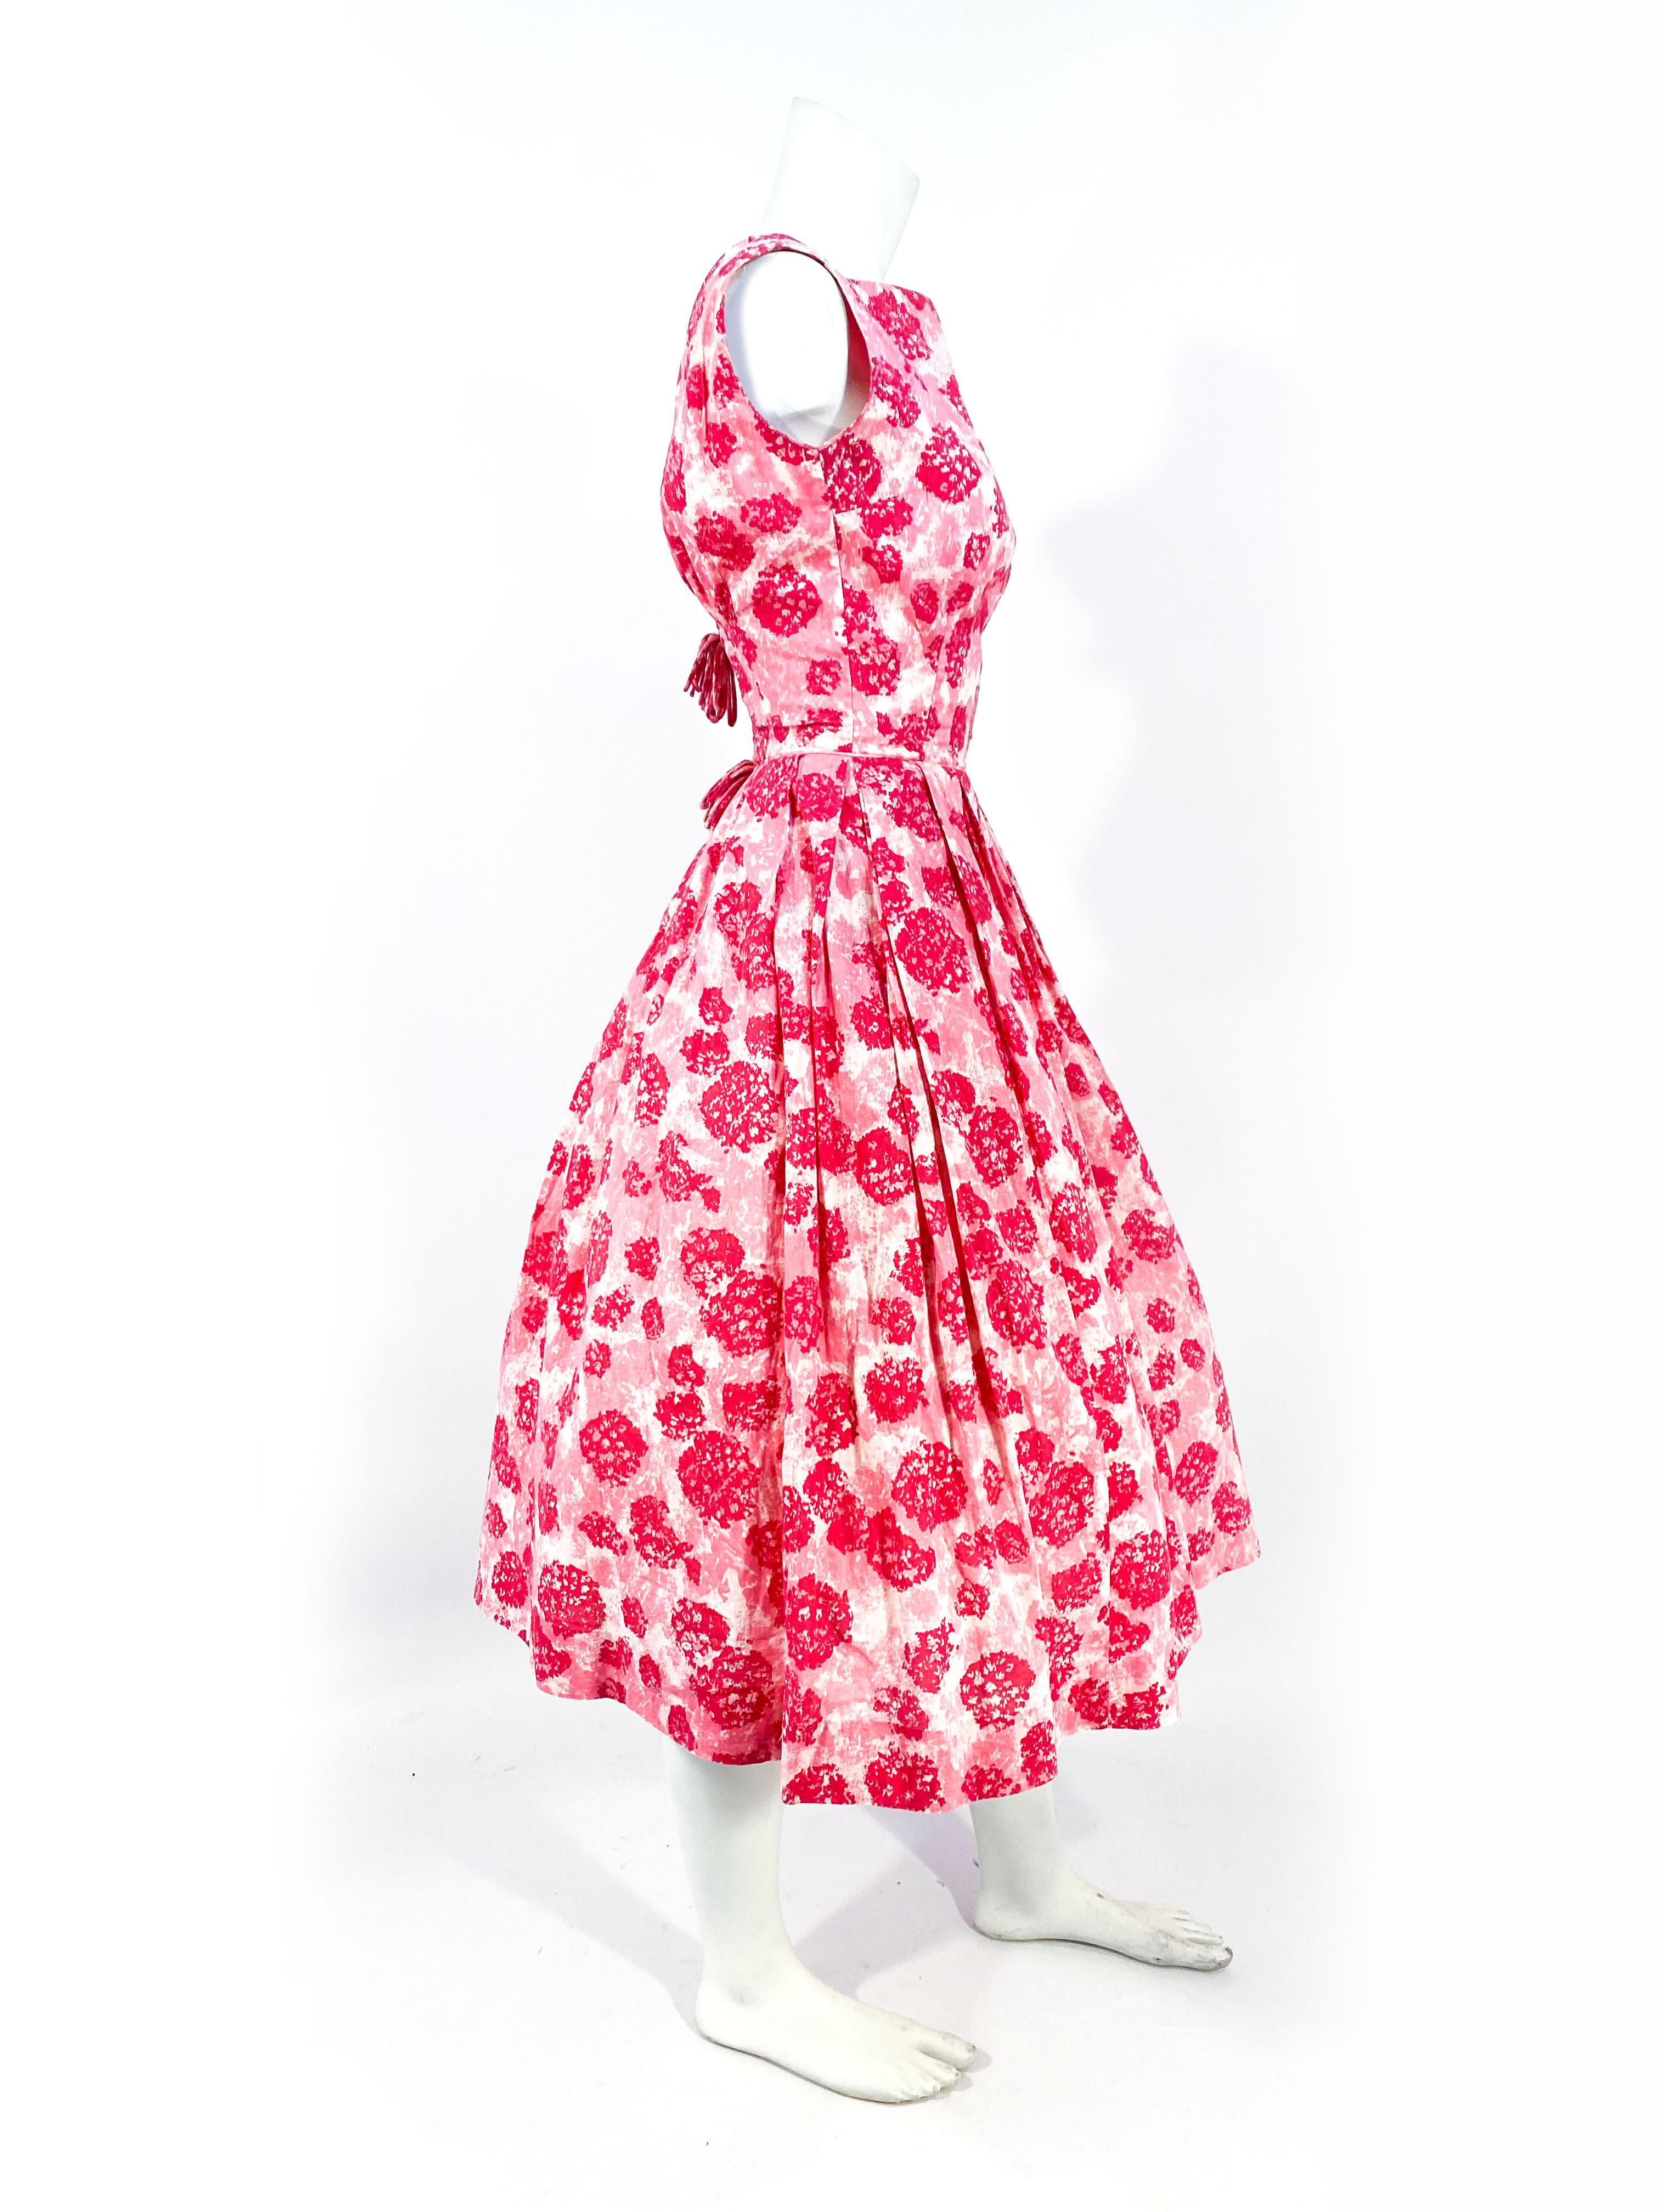 Men's 1950s/1960s Pink Cotton Day Dress with Abstract Floral Print